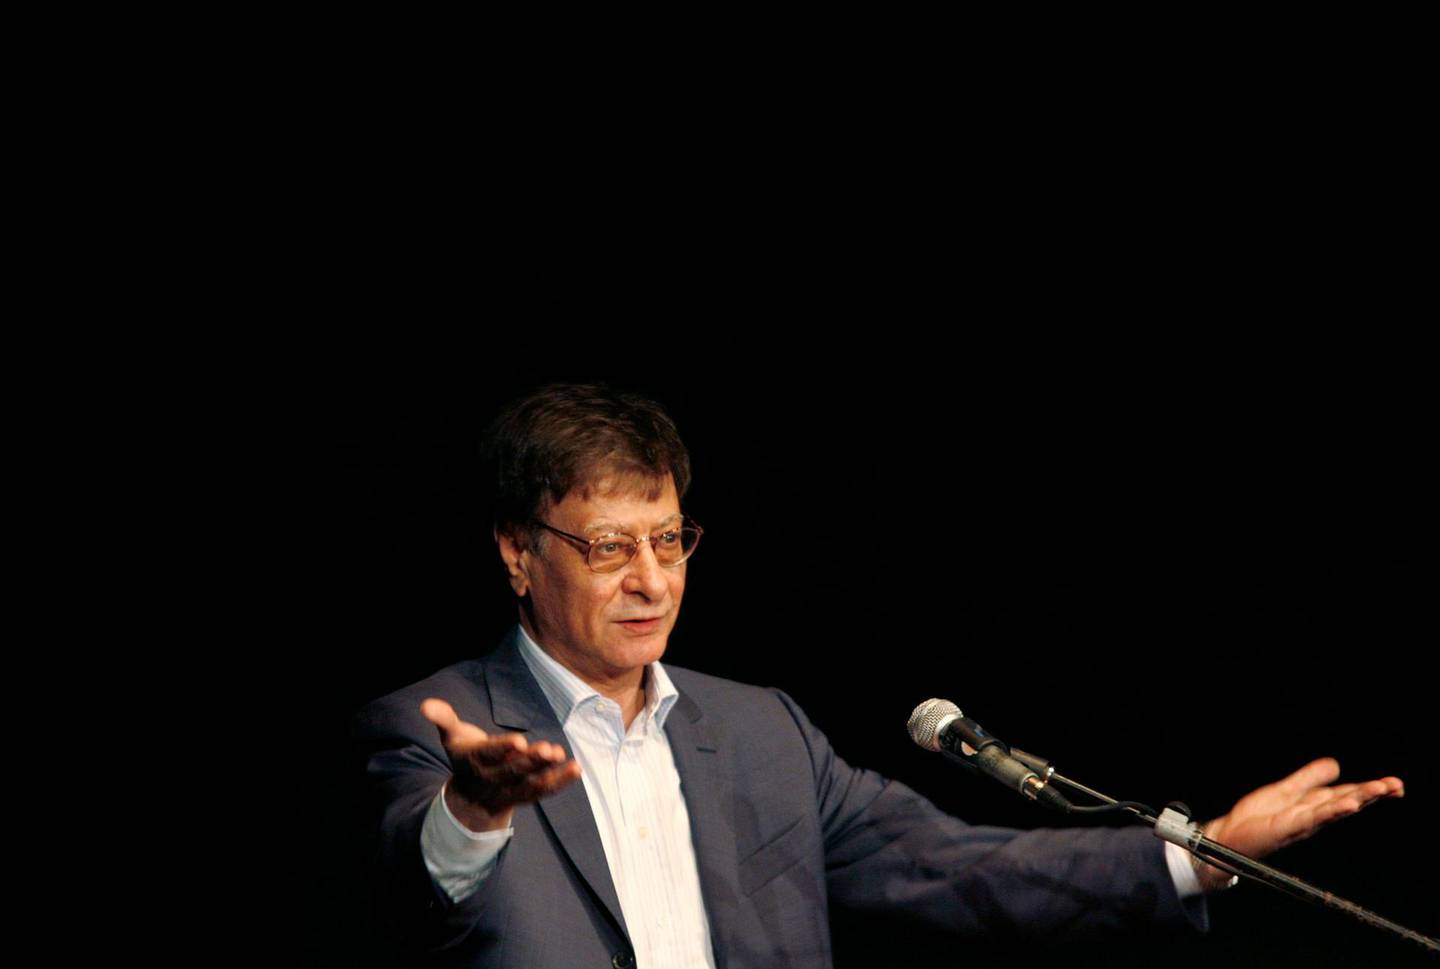 Palestinian poet and journalist Mahmoud Darwish gestures during his show in the northern Israeli city of Haifa July 15, 2007. Darwish, seen as a symbol of Palestinian nationalism, made his first appearance in Israel on Sunday since his self-imposed exile from Israel, where he lived until 1971.  REUTERS/Gil Cohen Magen (ISRAEL) - GM1DVSCPPCAA